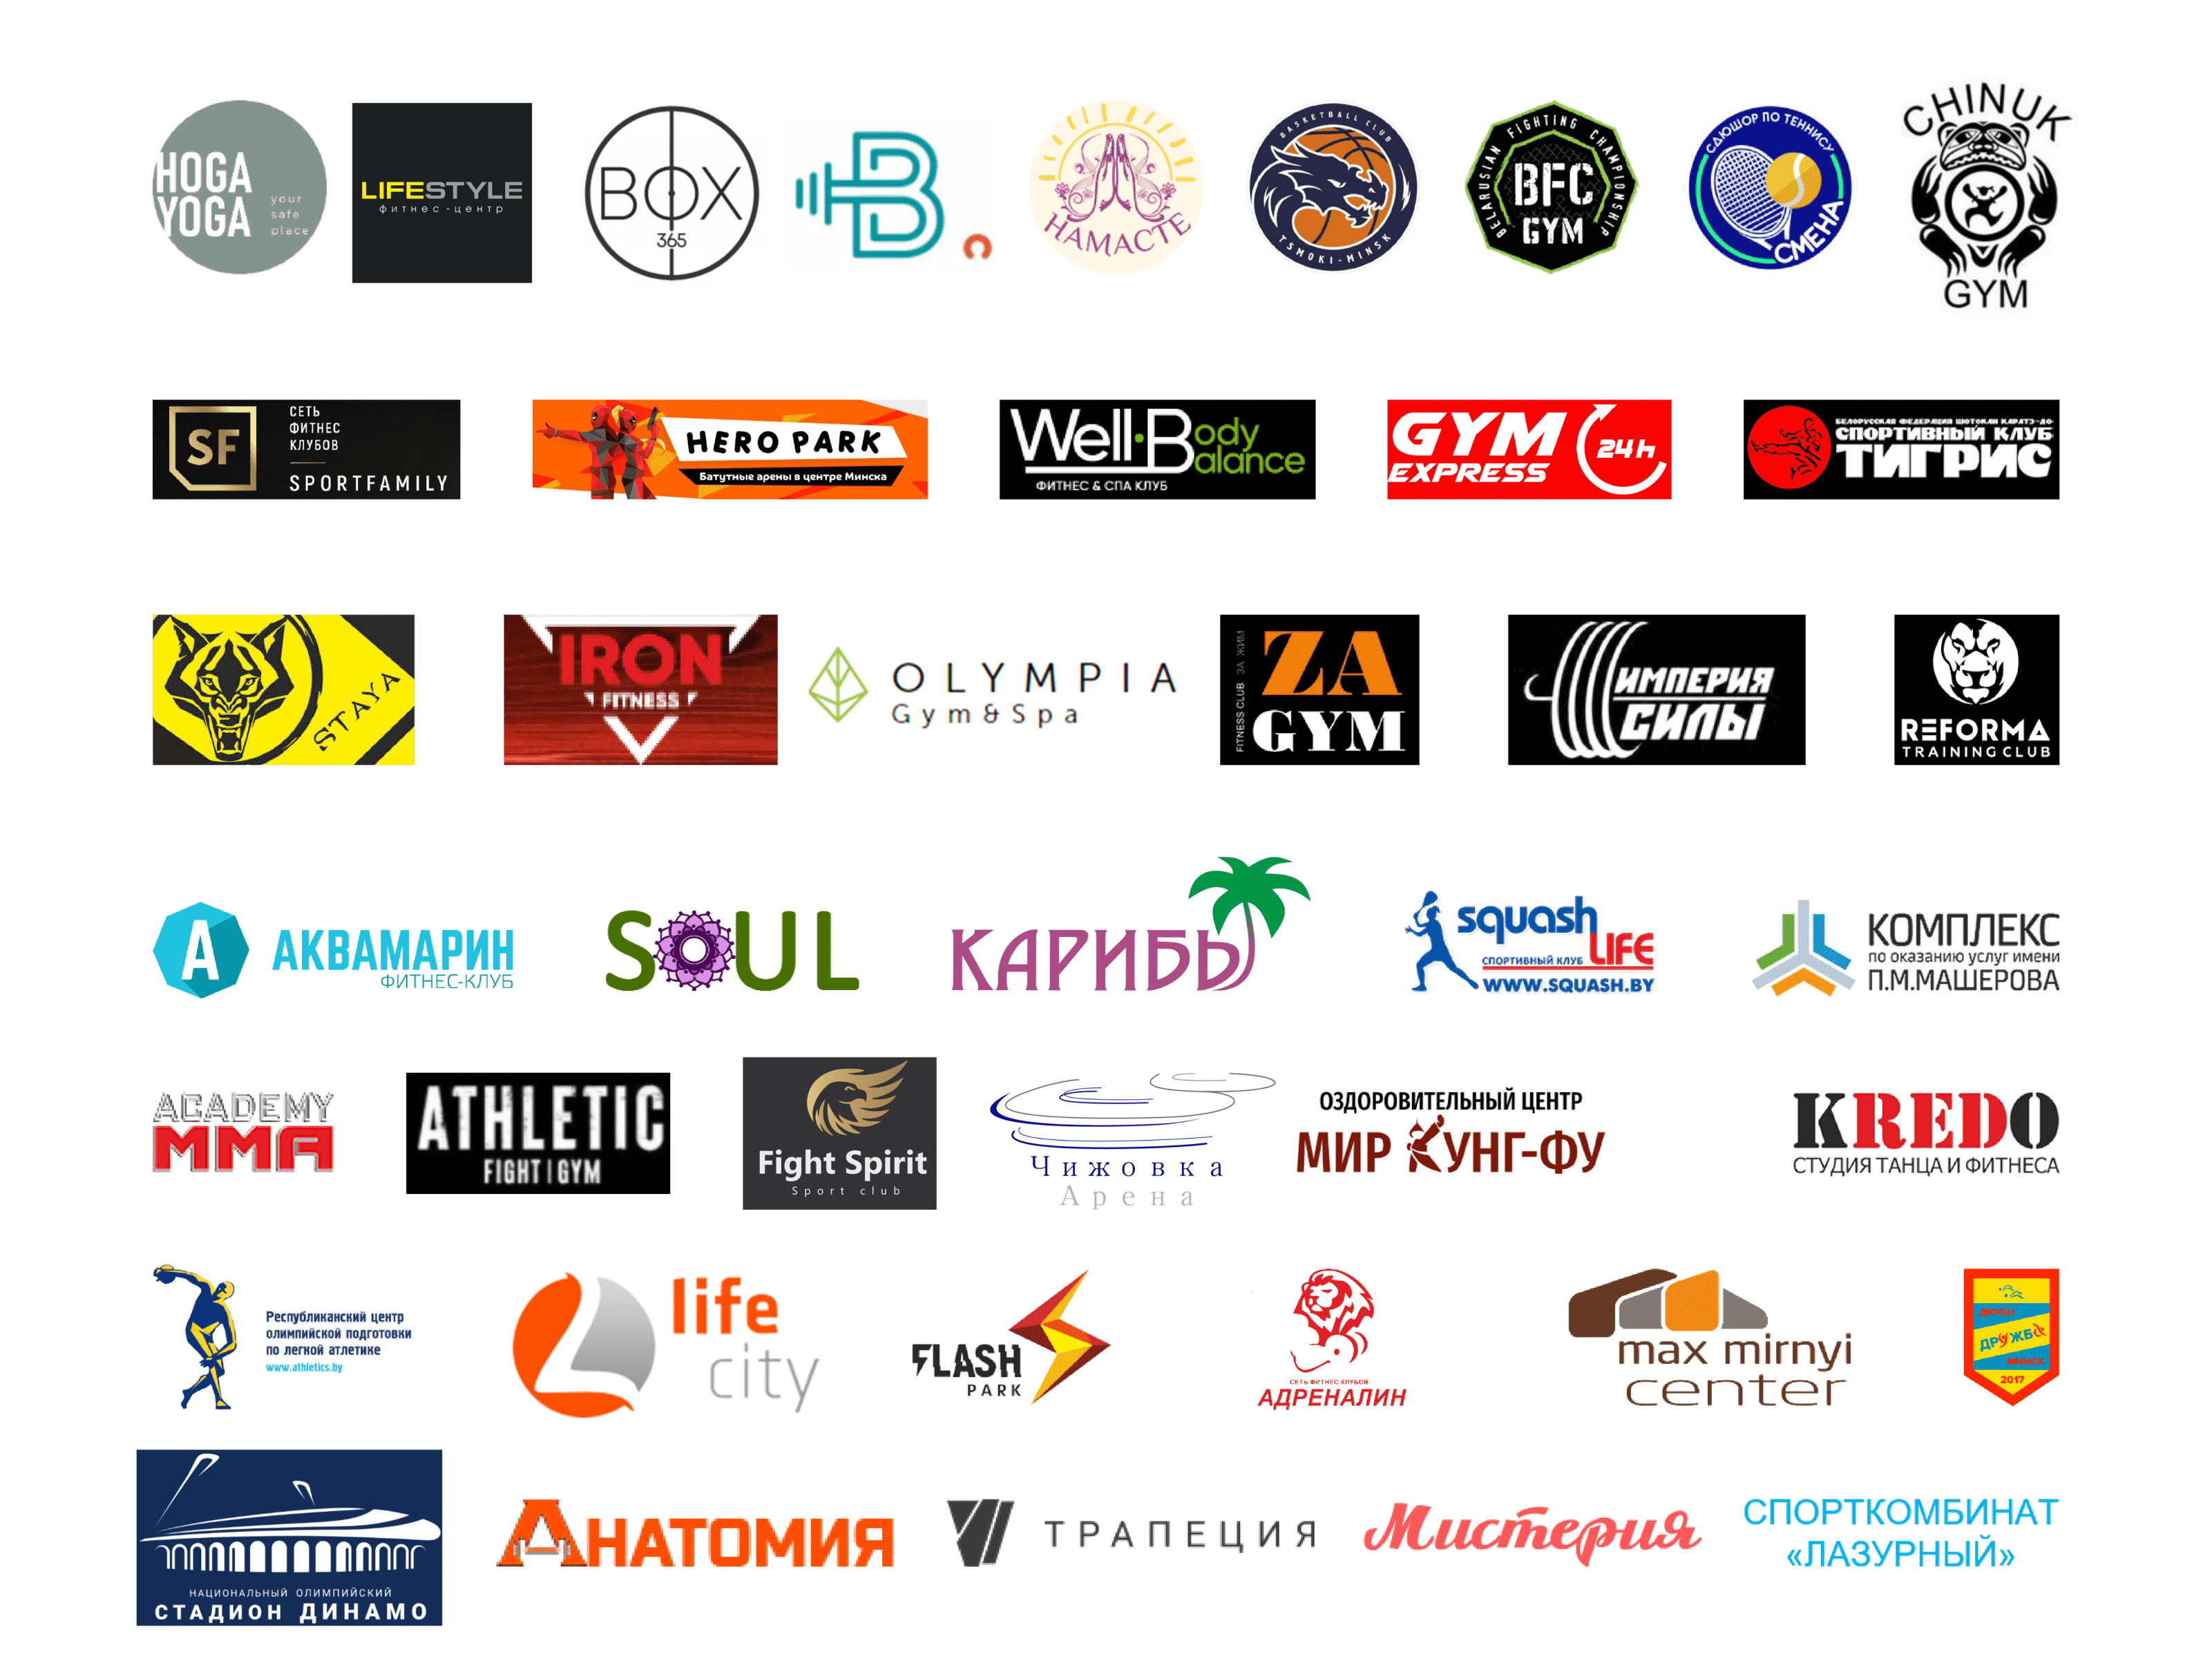 Suppliers logos